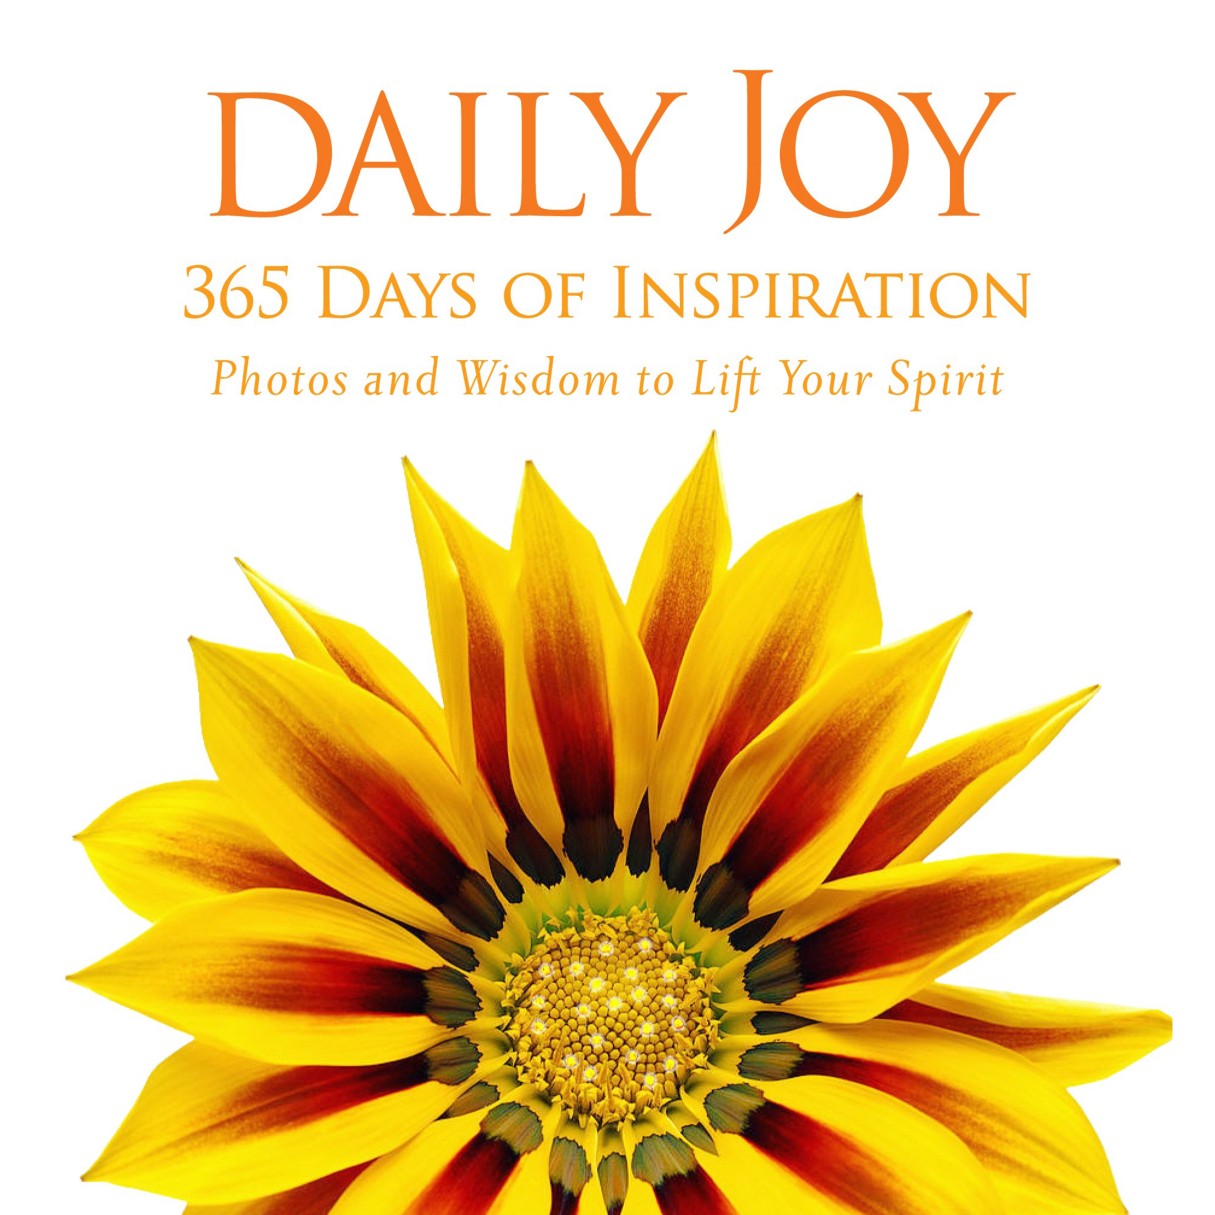 Daily Joy: 365 Days of Inspiration Book – National Geographic